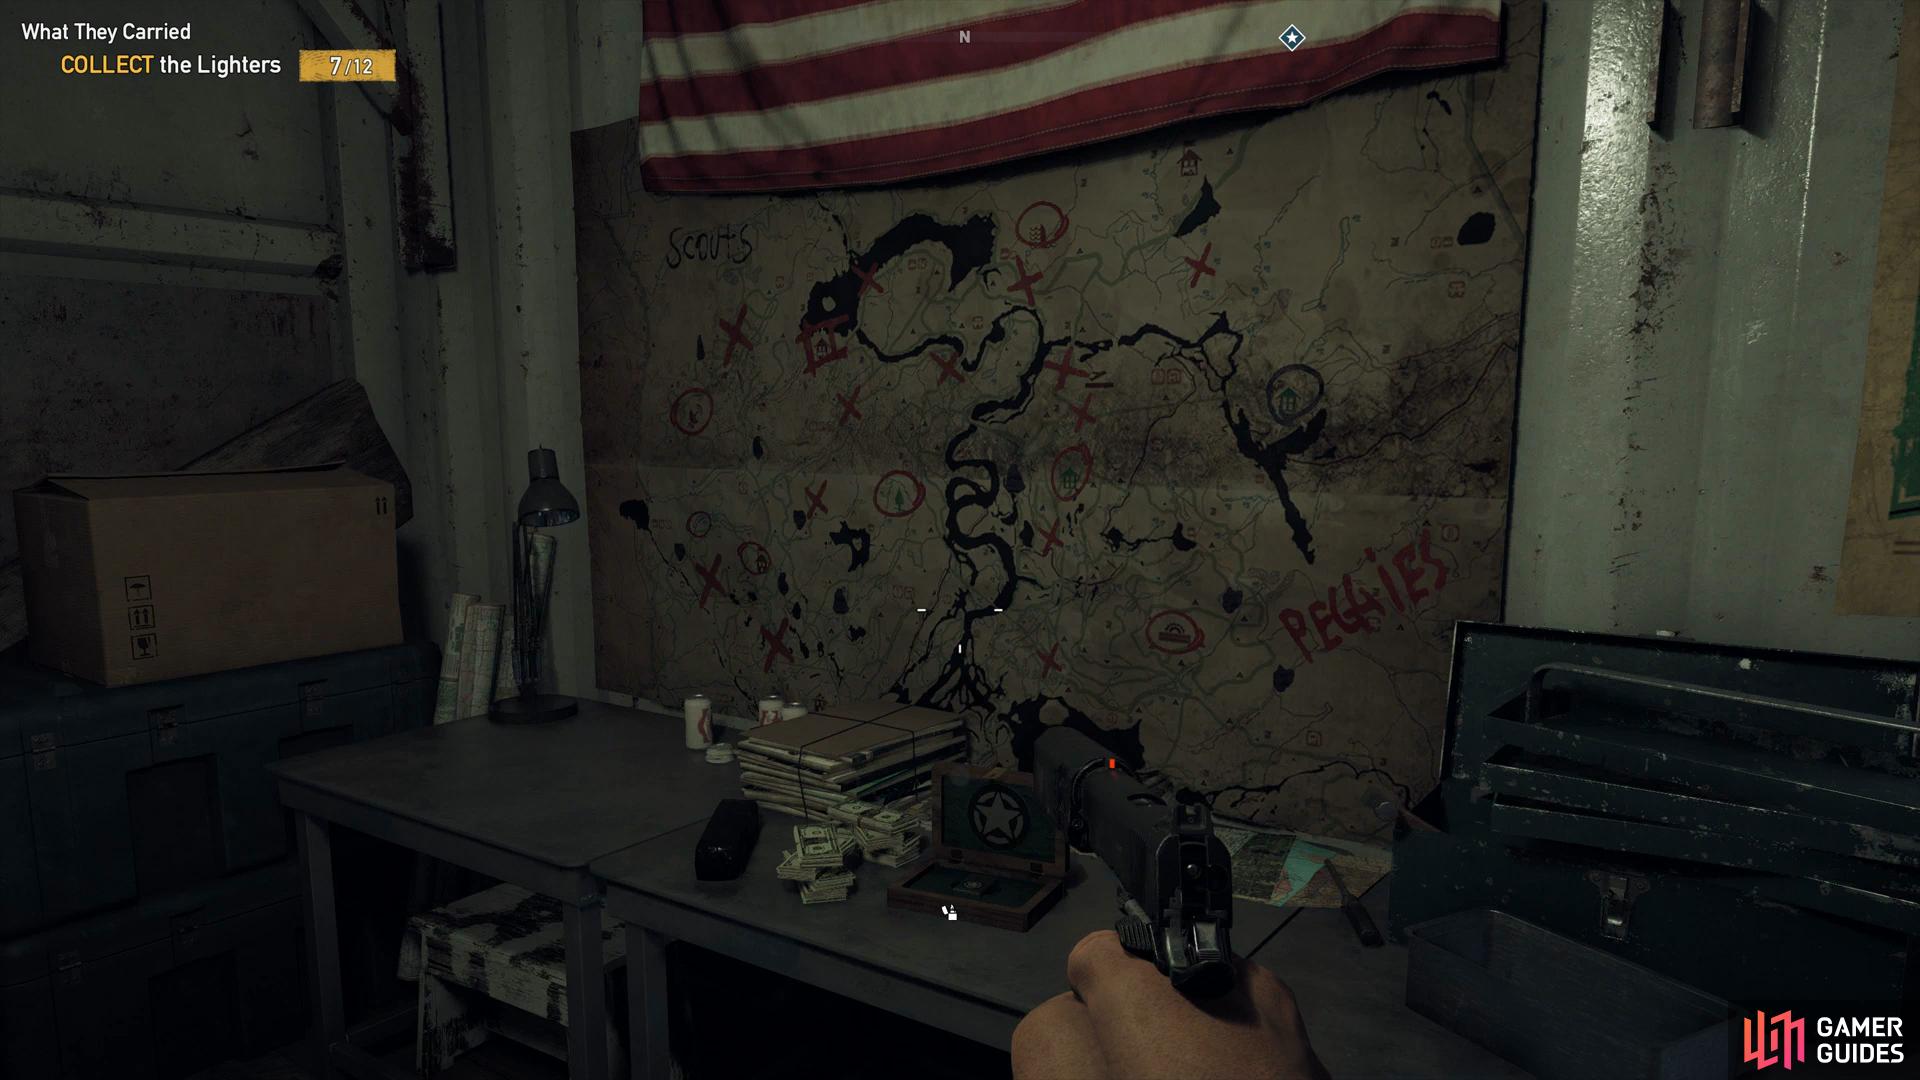 the Lighter is sitting in front of the map of Hope County at the bottom of the bunker.